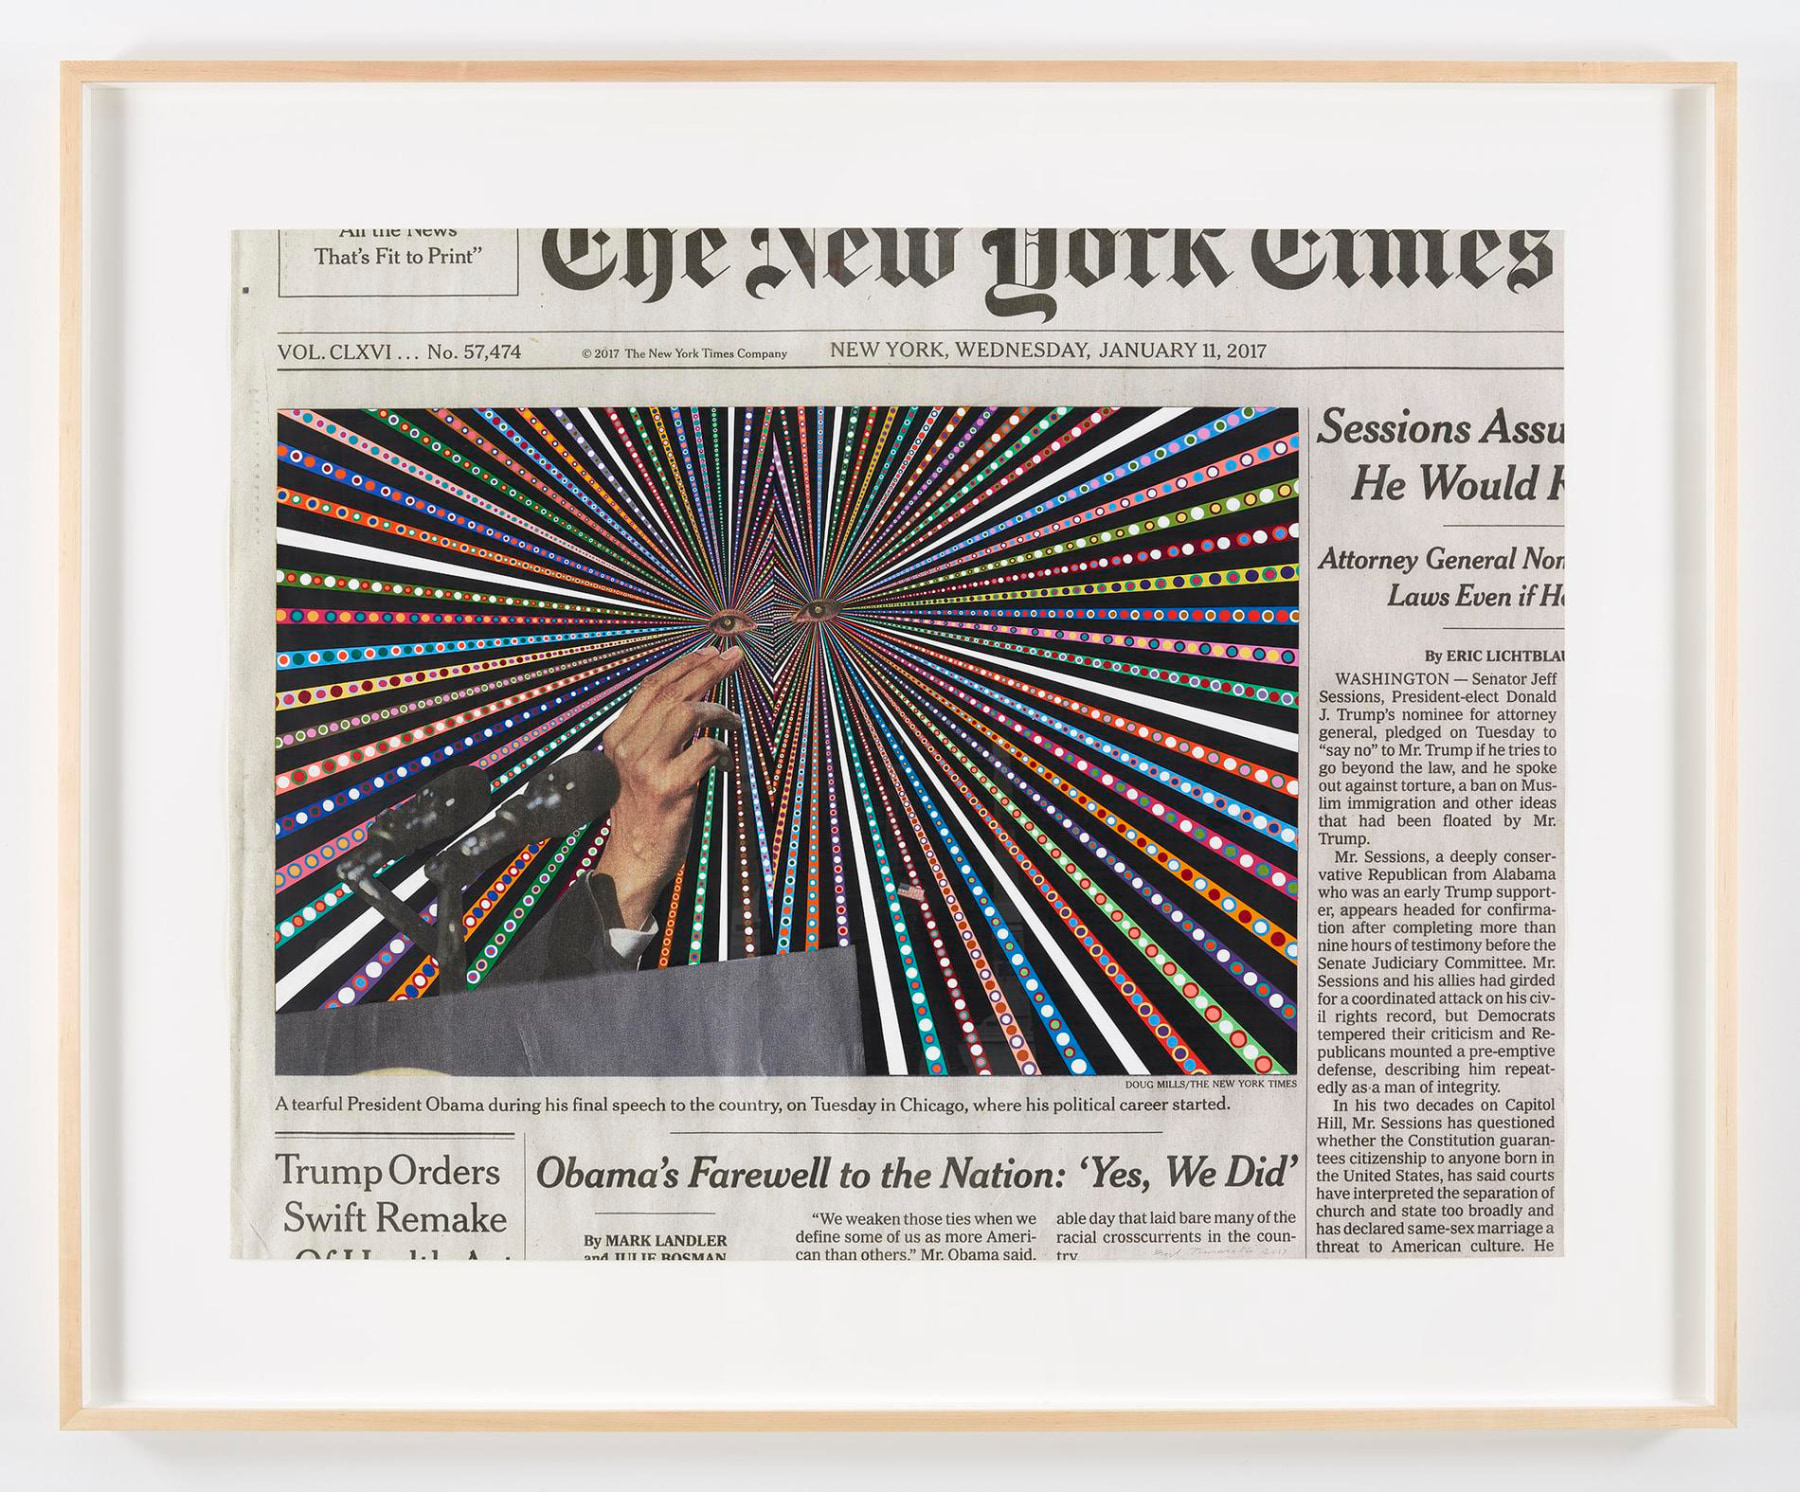 Image of FRED TOMASELLI's Wednesday, January 11, 2017, 2017